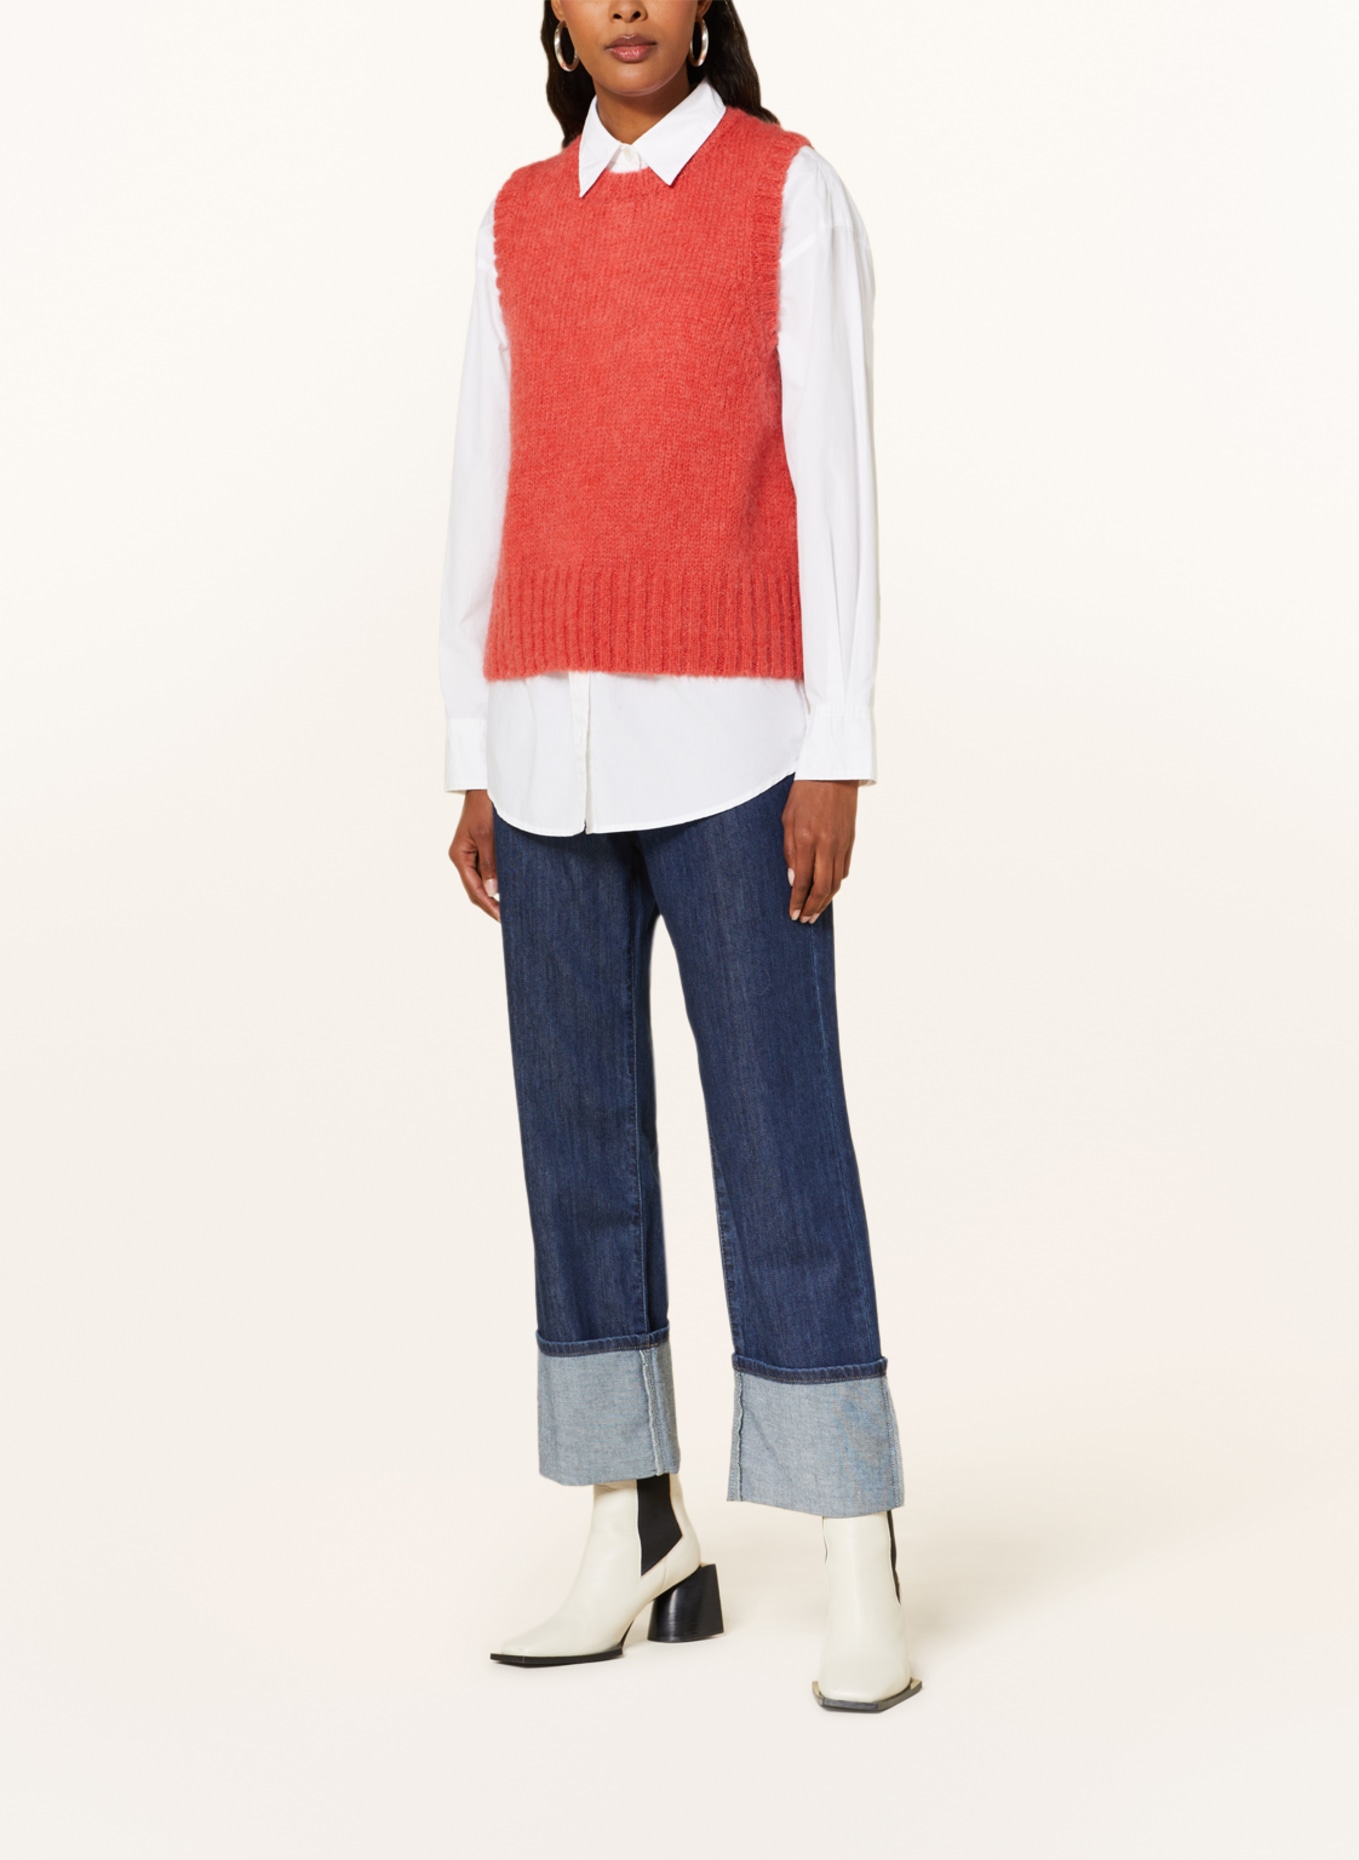 summum woman Sweater vest with mohair, Color: RED (Image 2)